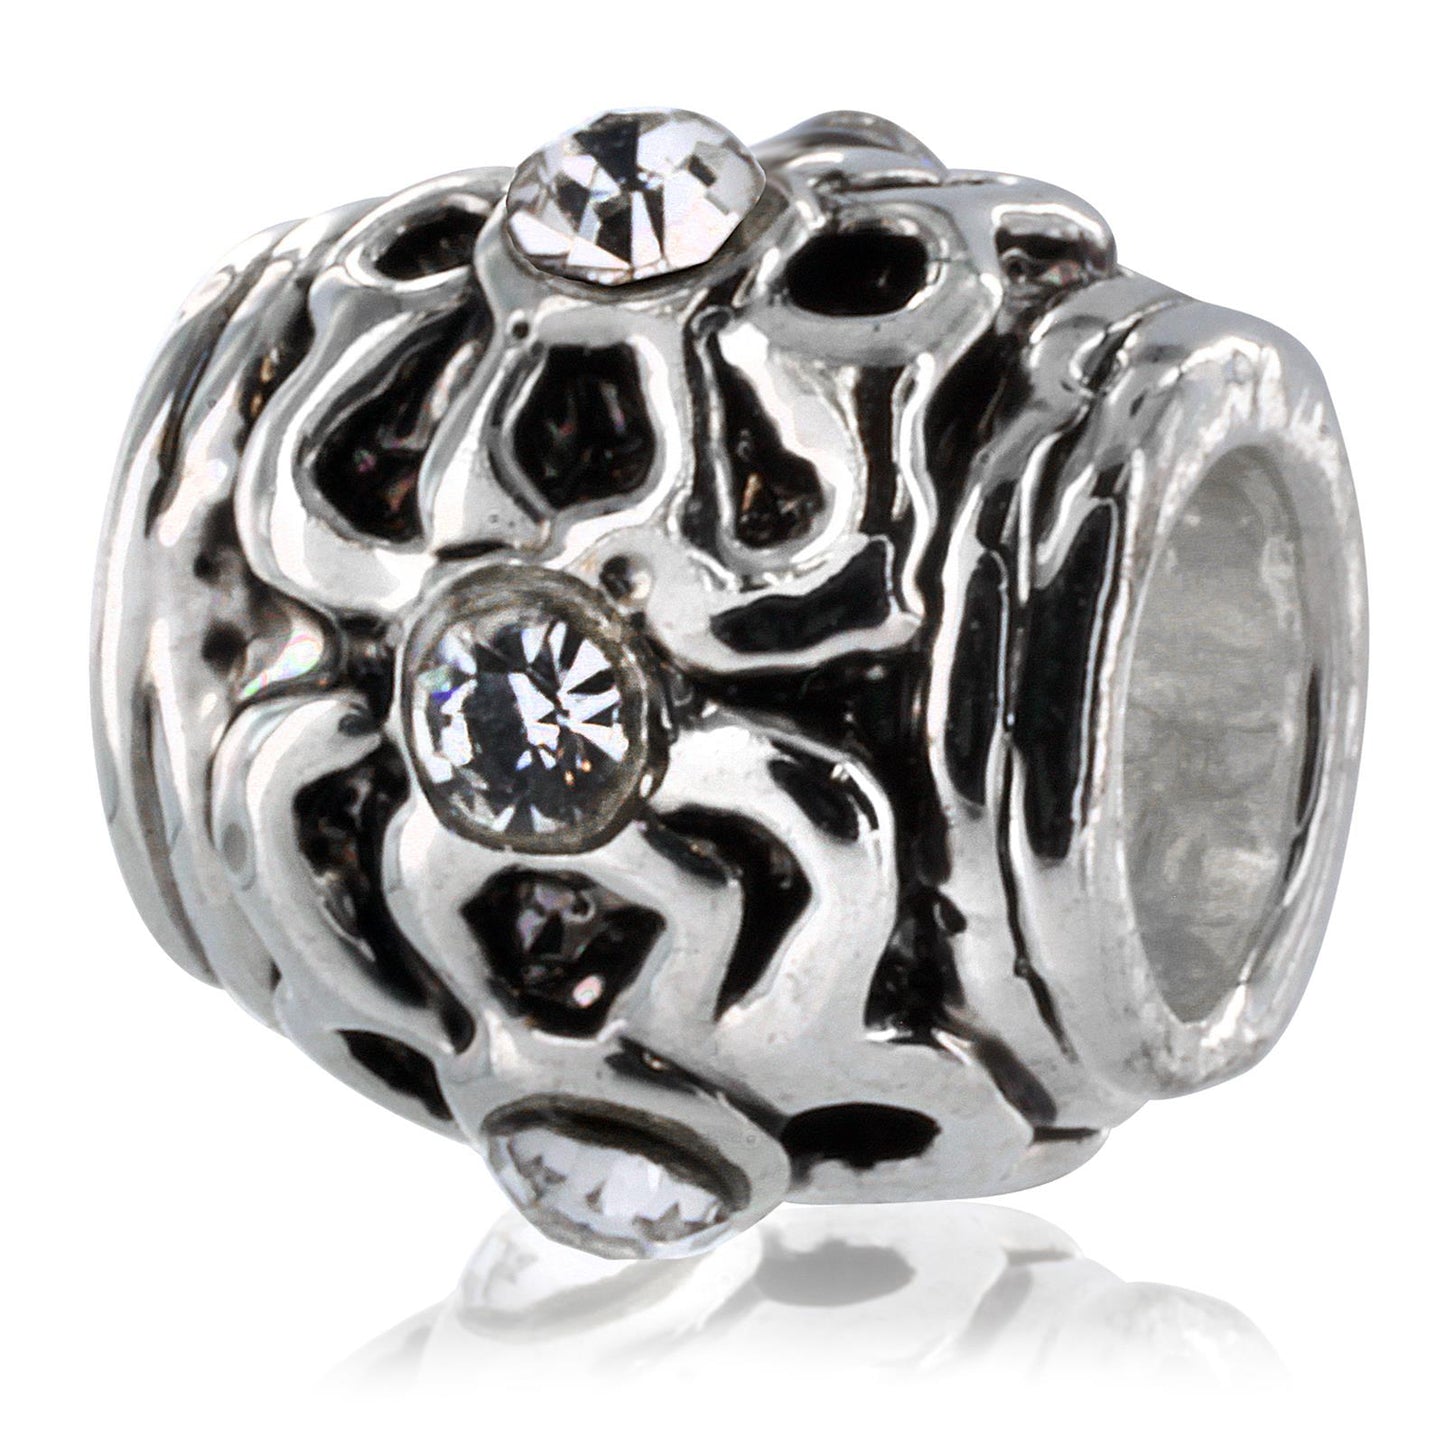 Silver Plated Gleaming Stone Bead